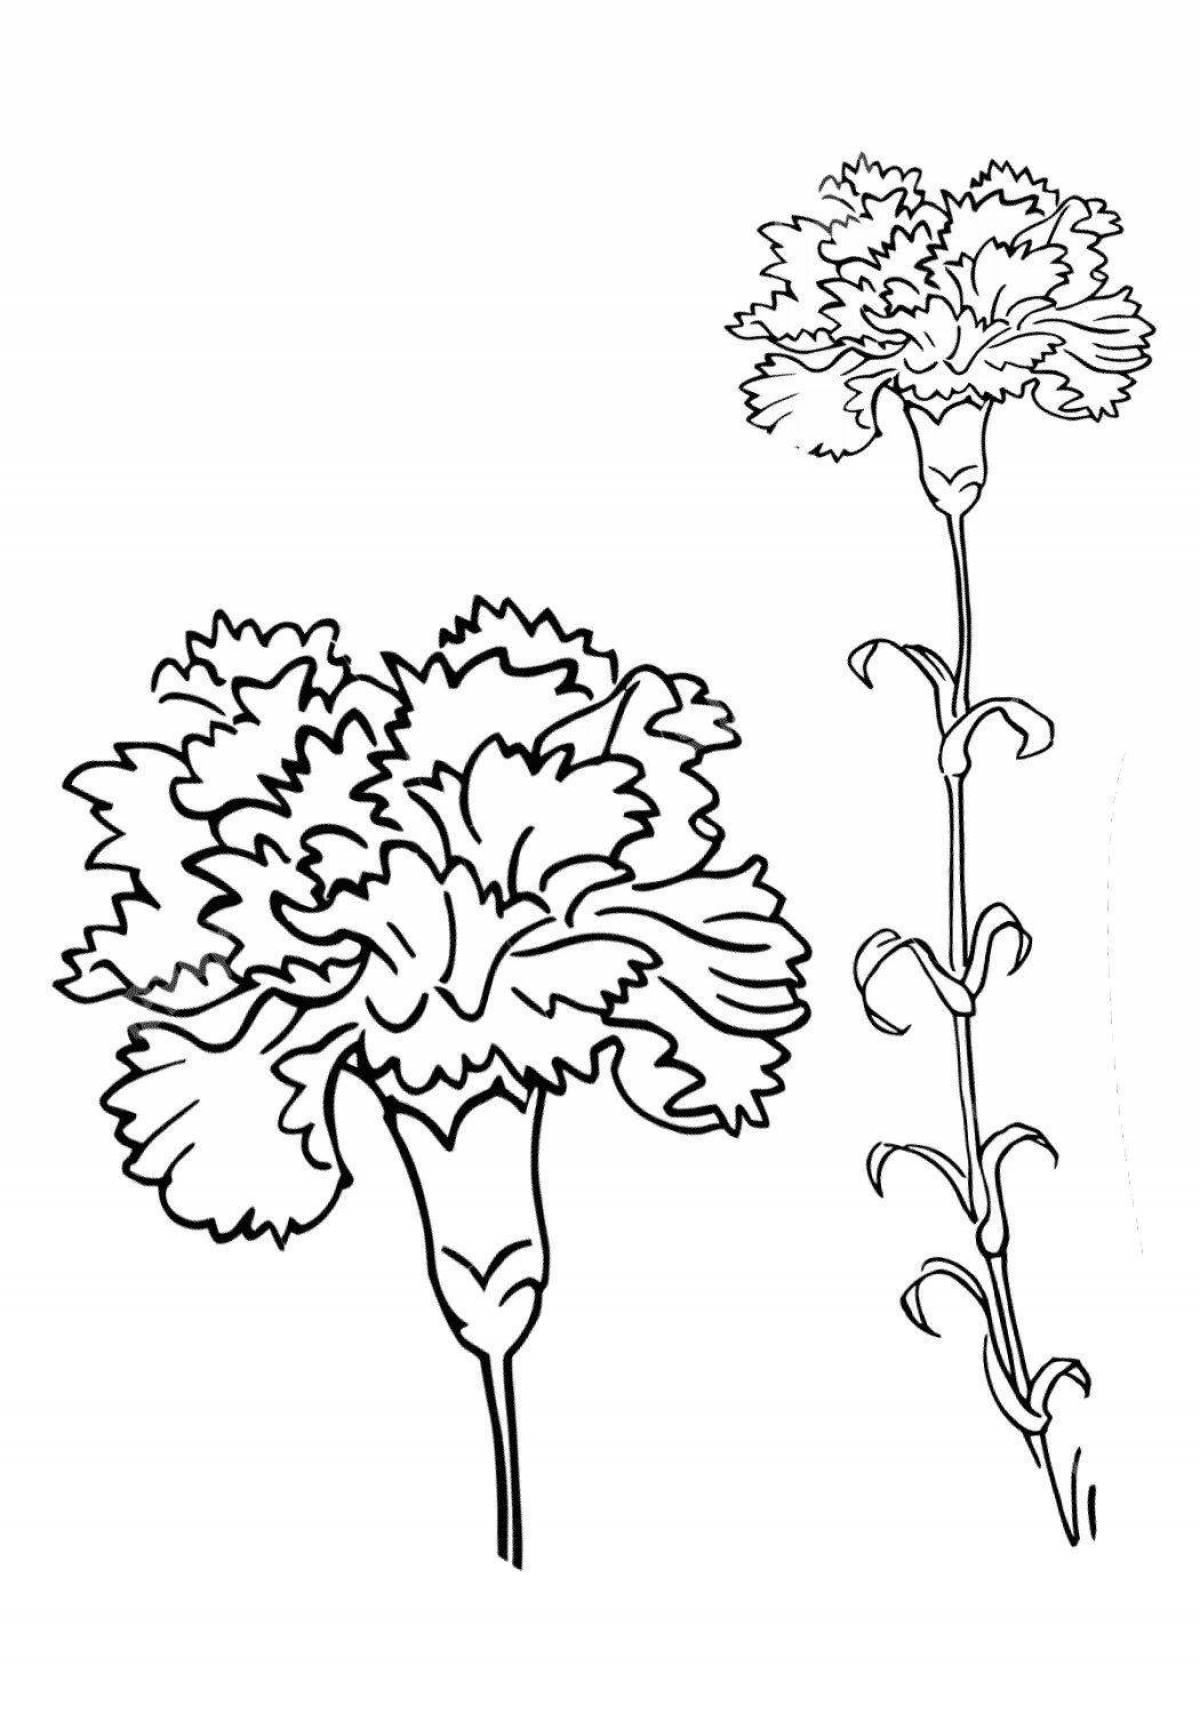 Coloring peaceful carnation